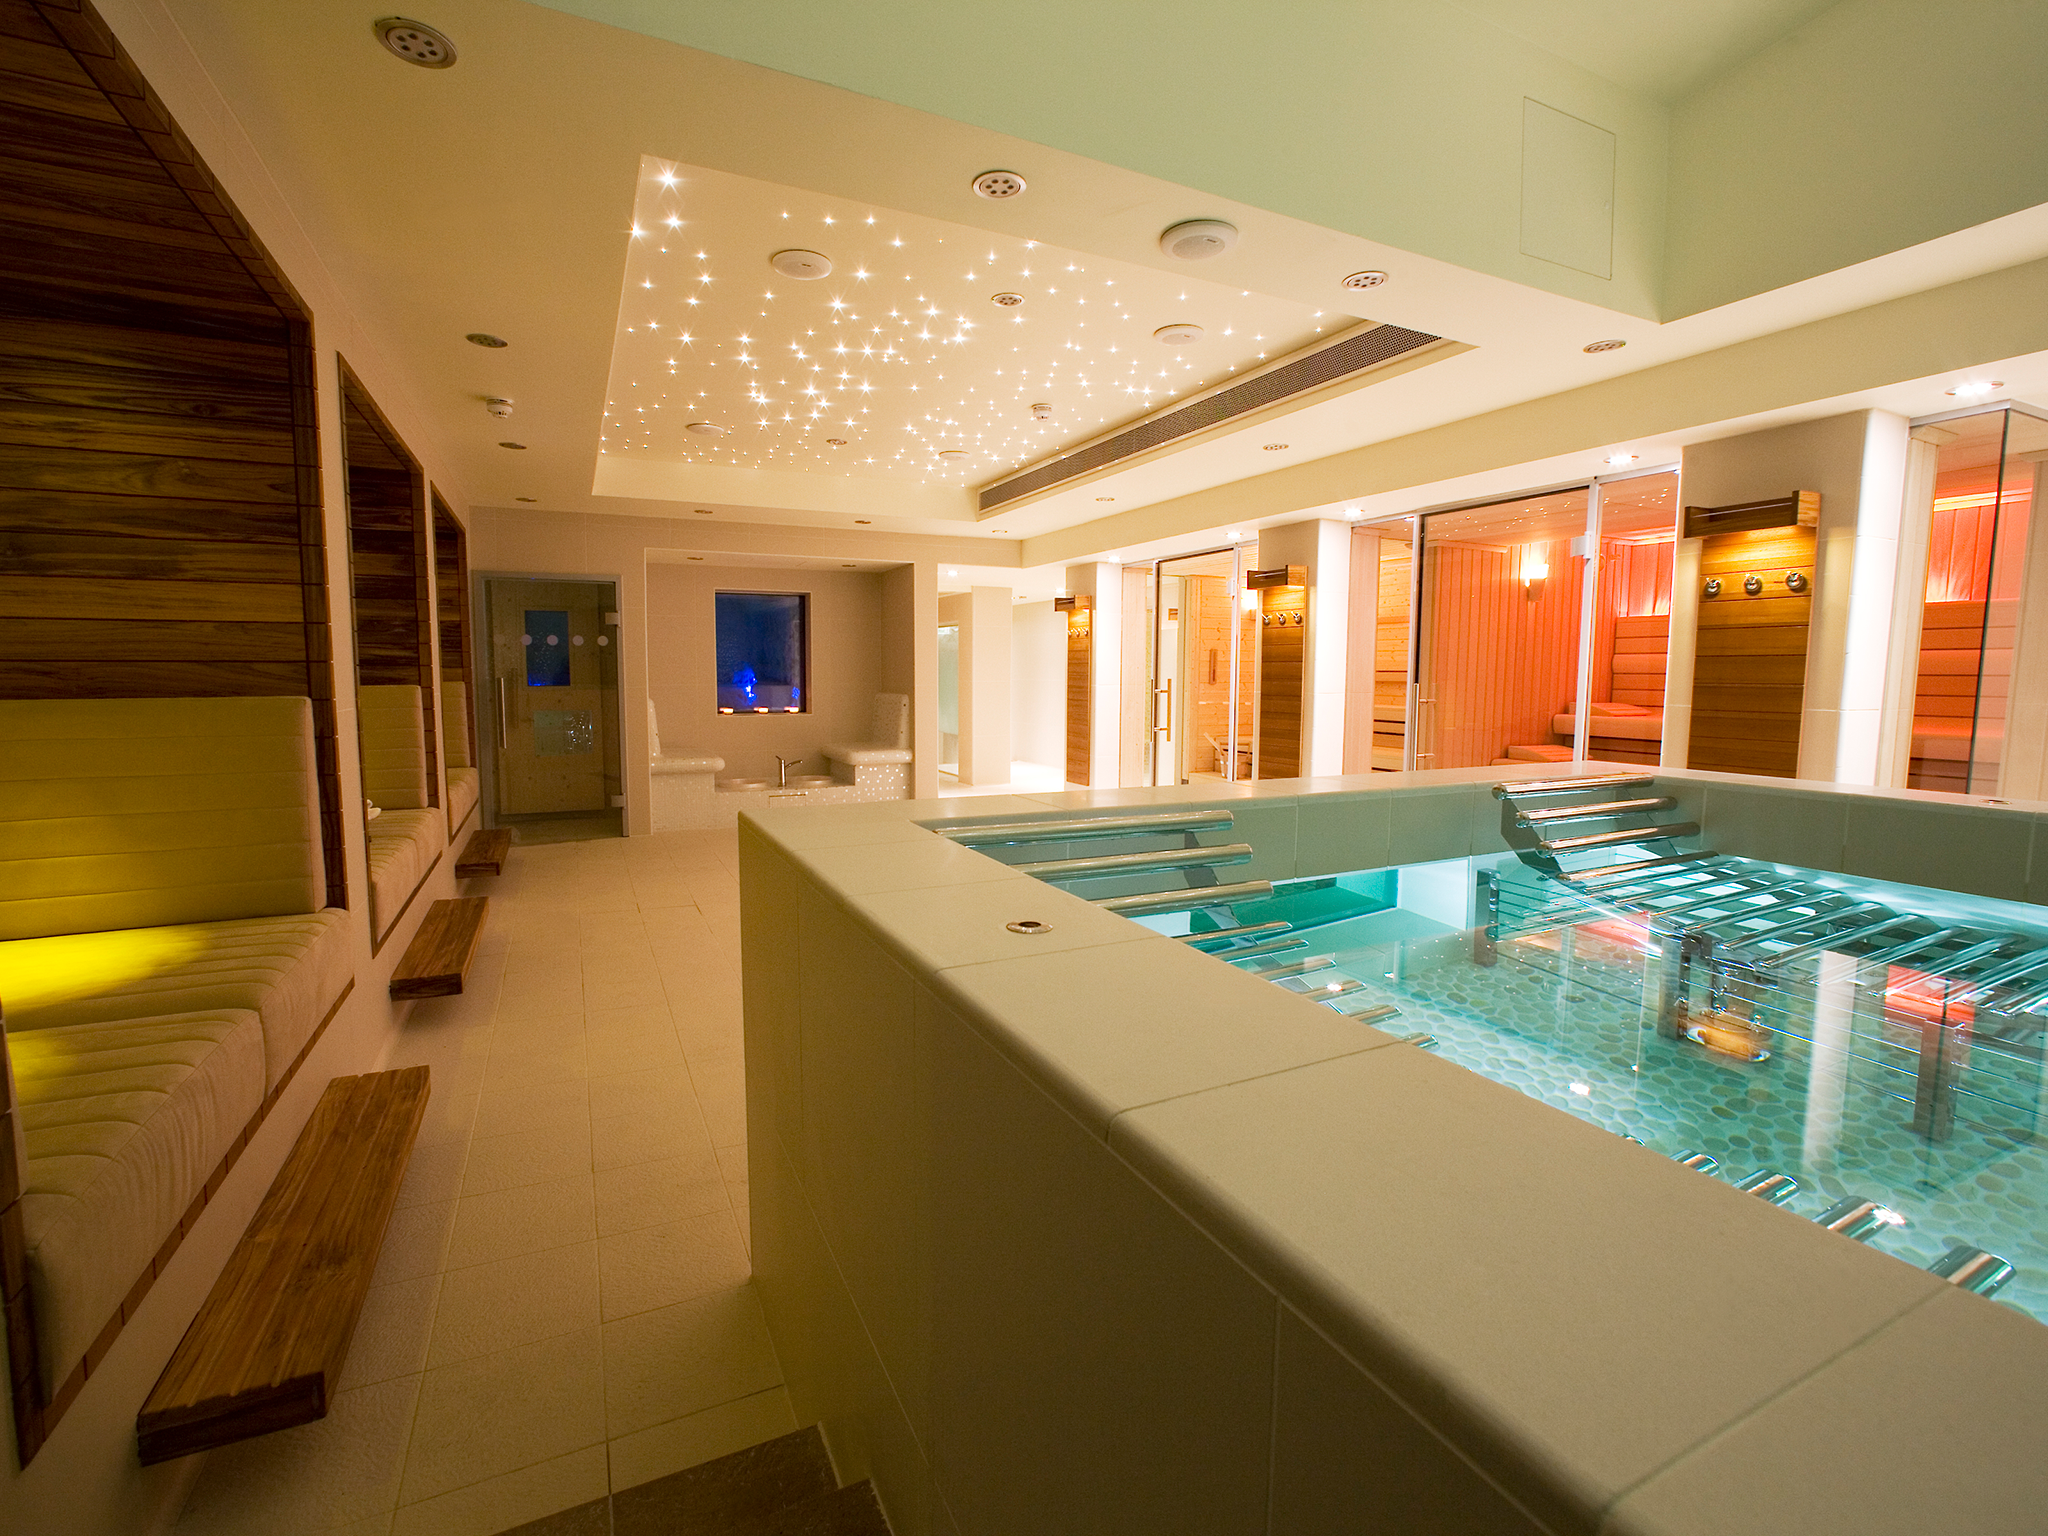 You can relax in the large, bubbling hydrotherapy pool